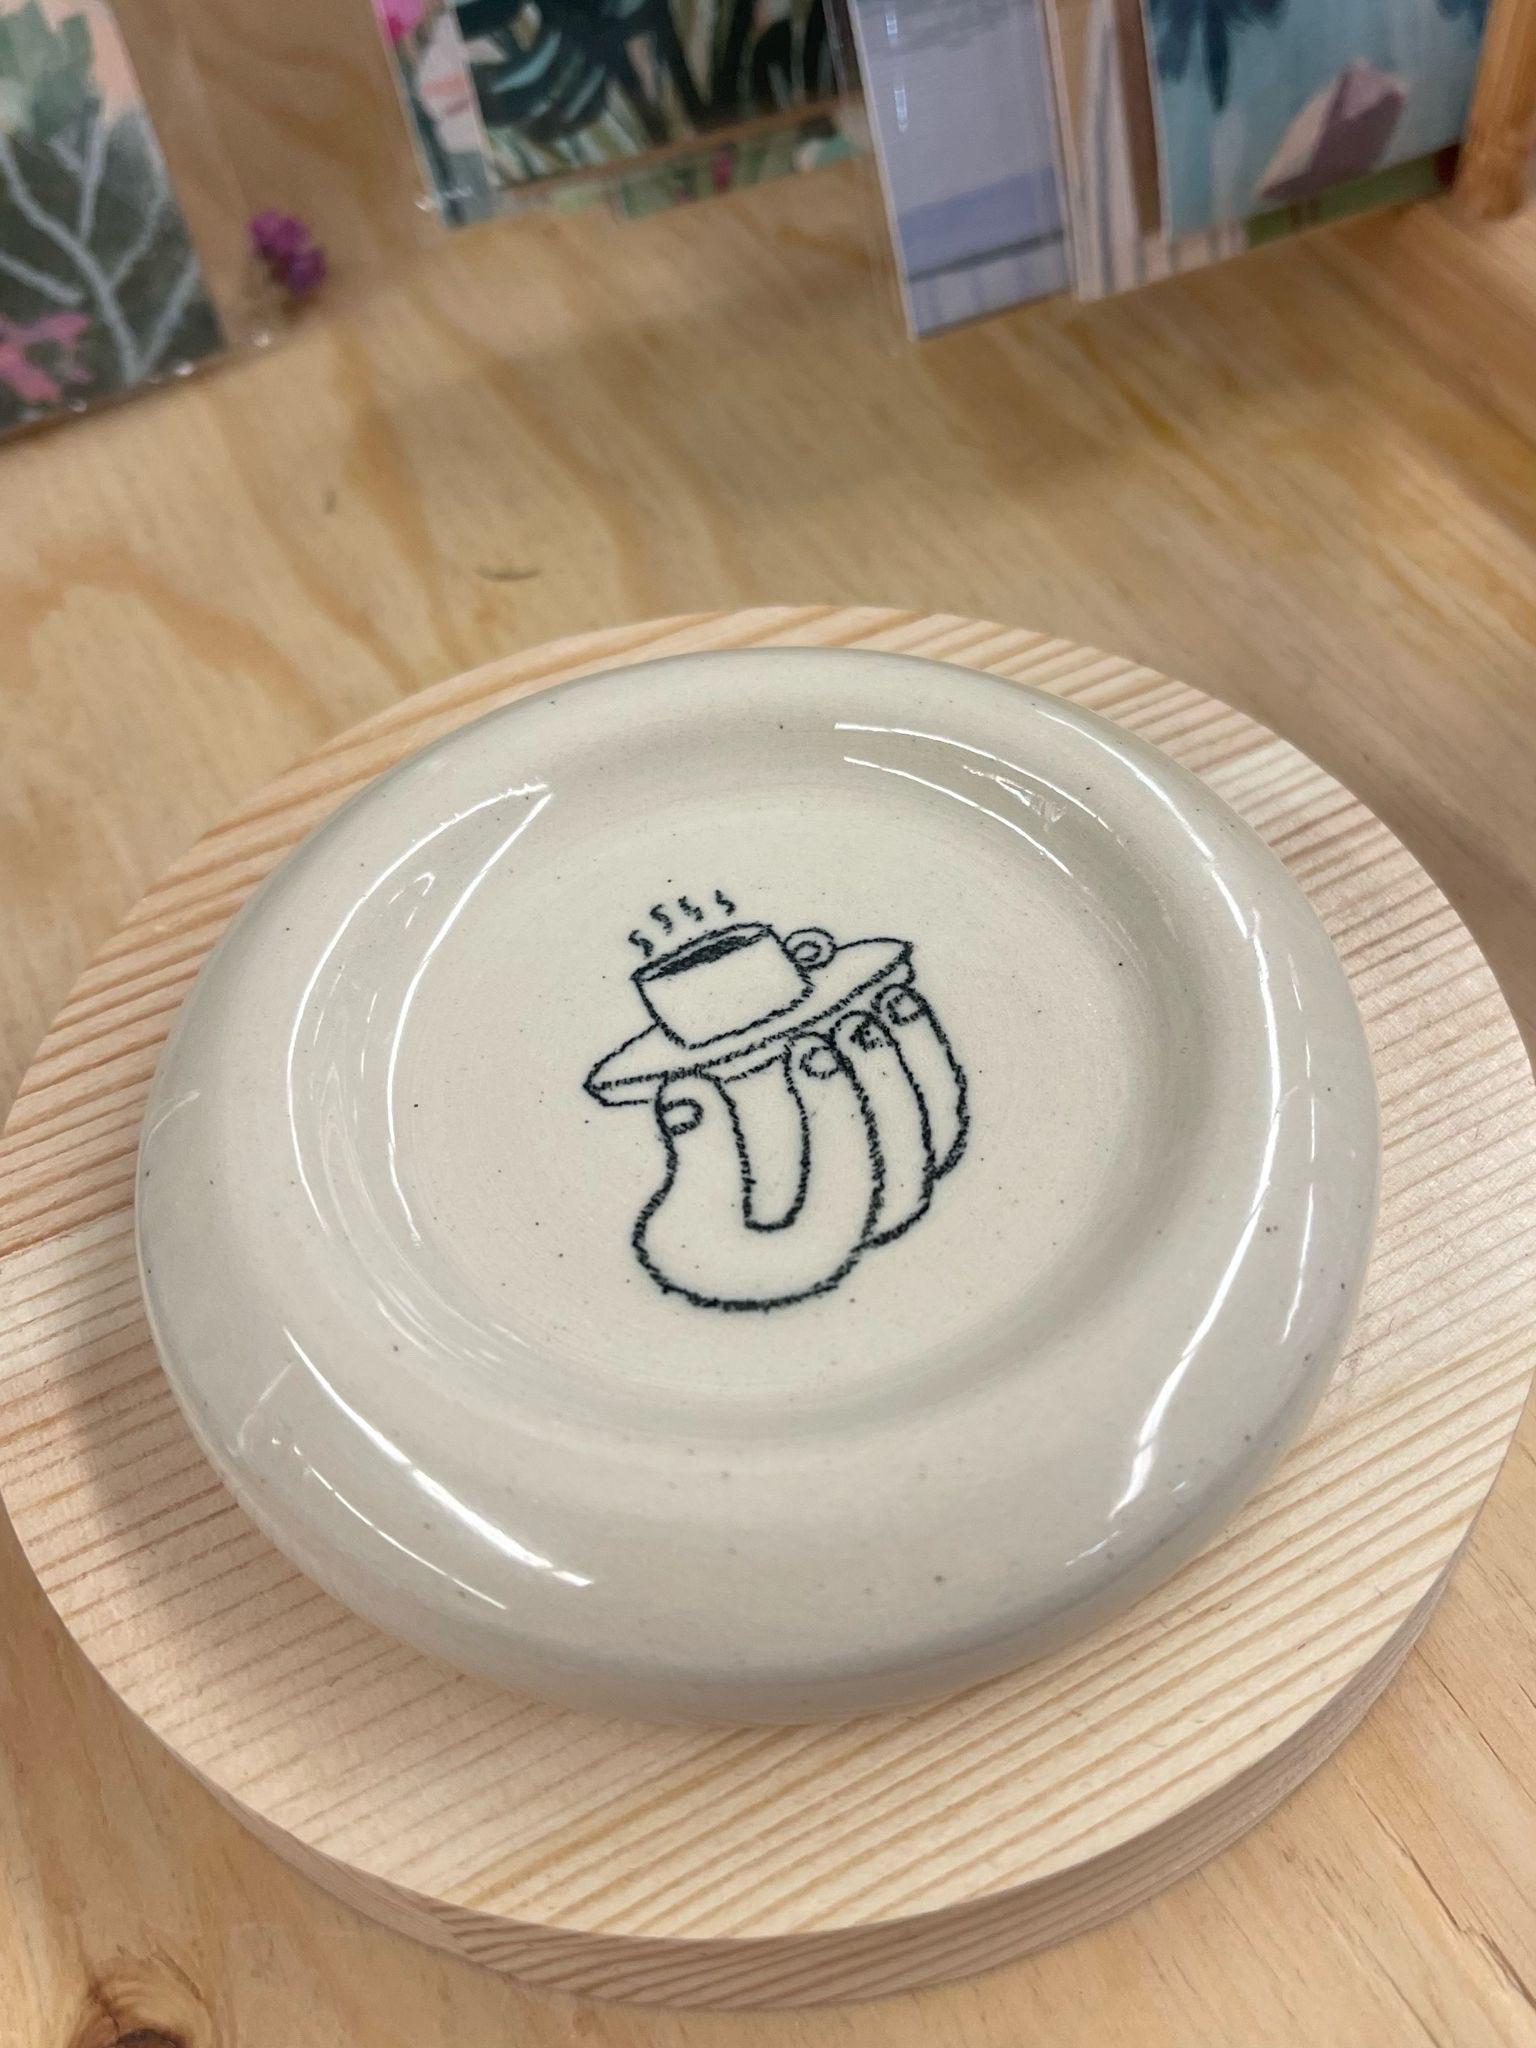 This petite dish has an adorable cartoon doodle of a hand holding Cup in the center. Makers mark on the bottom. Little Okie Studios is a Seattle company specializing in Kawaii inspired design. Every piece is Handmade, with slight variations natural